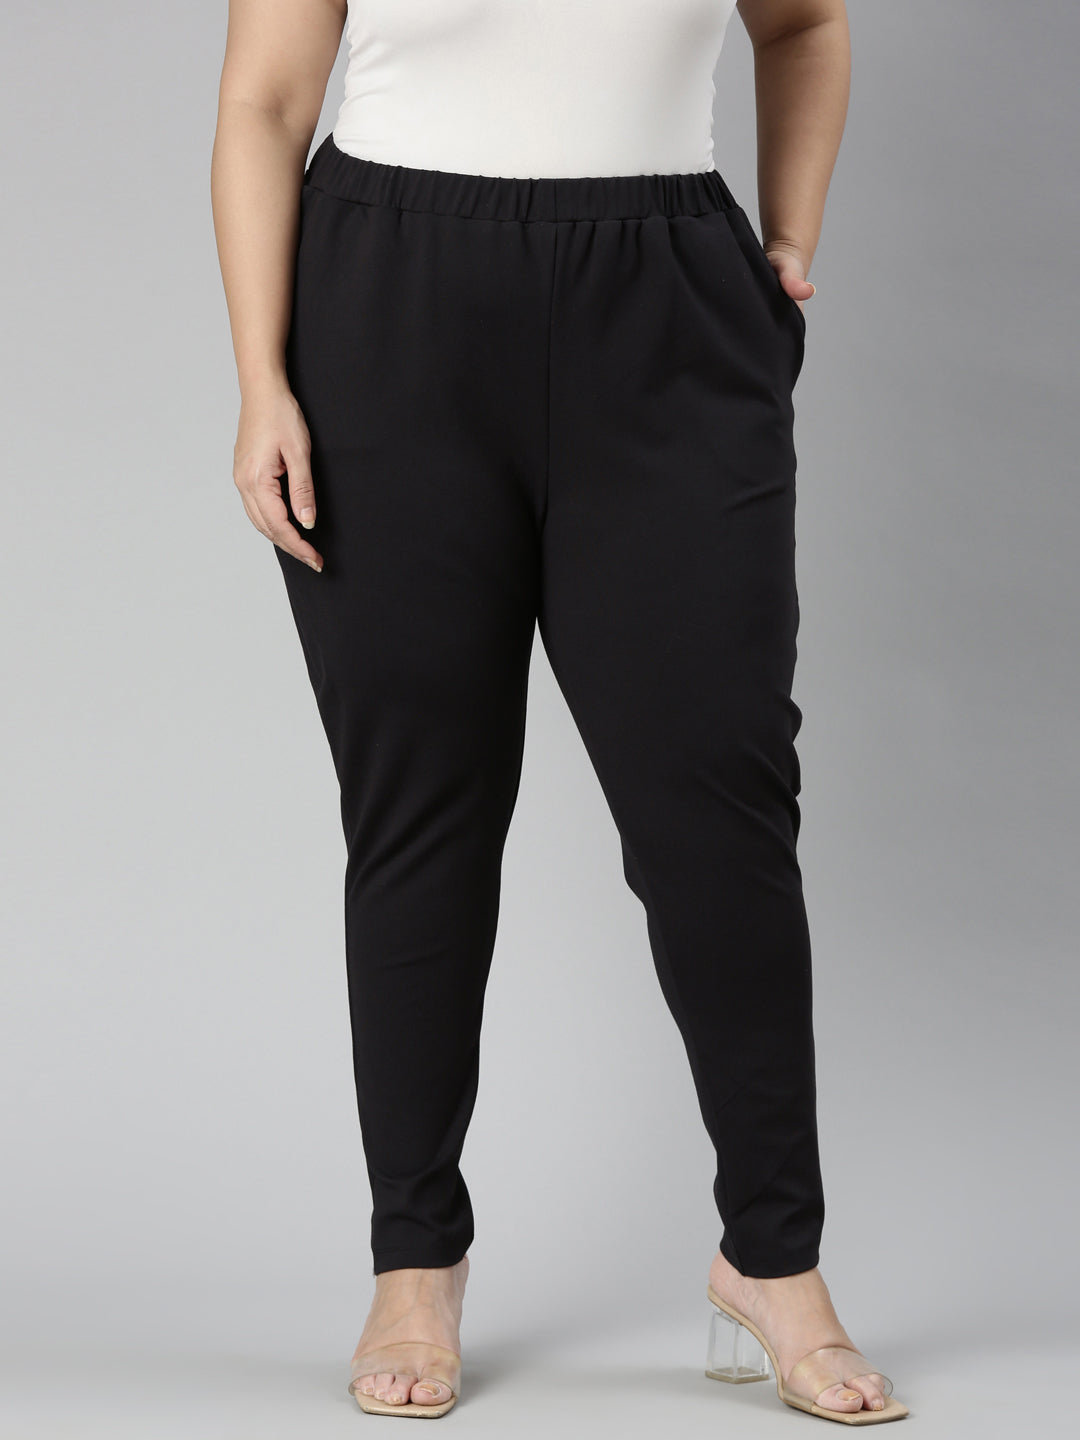 TheShaili - Women's Tapered fit Spandex Black Trousers